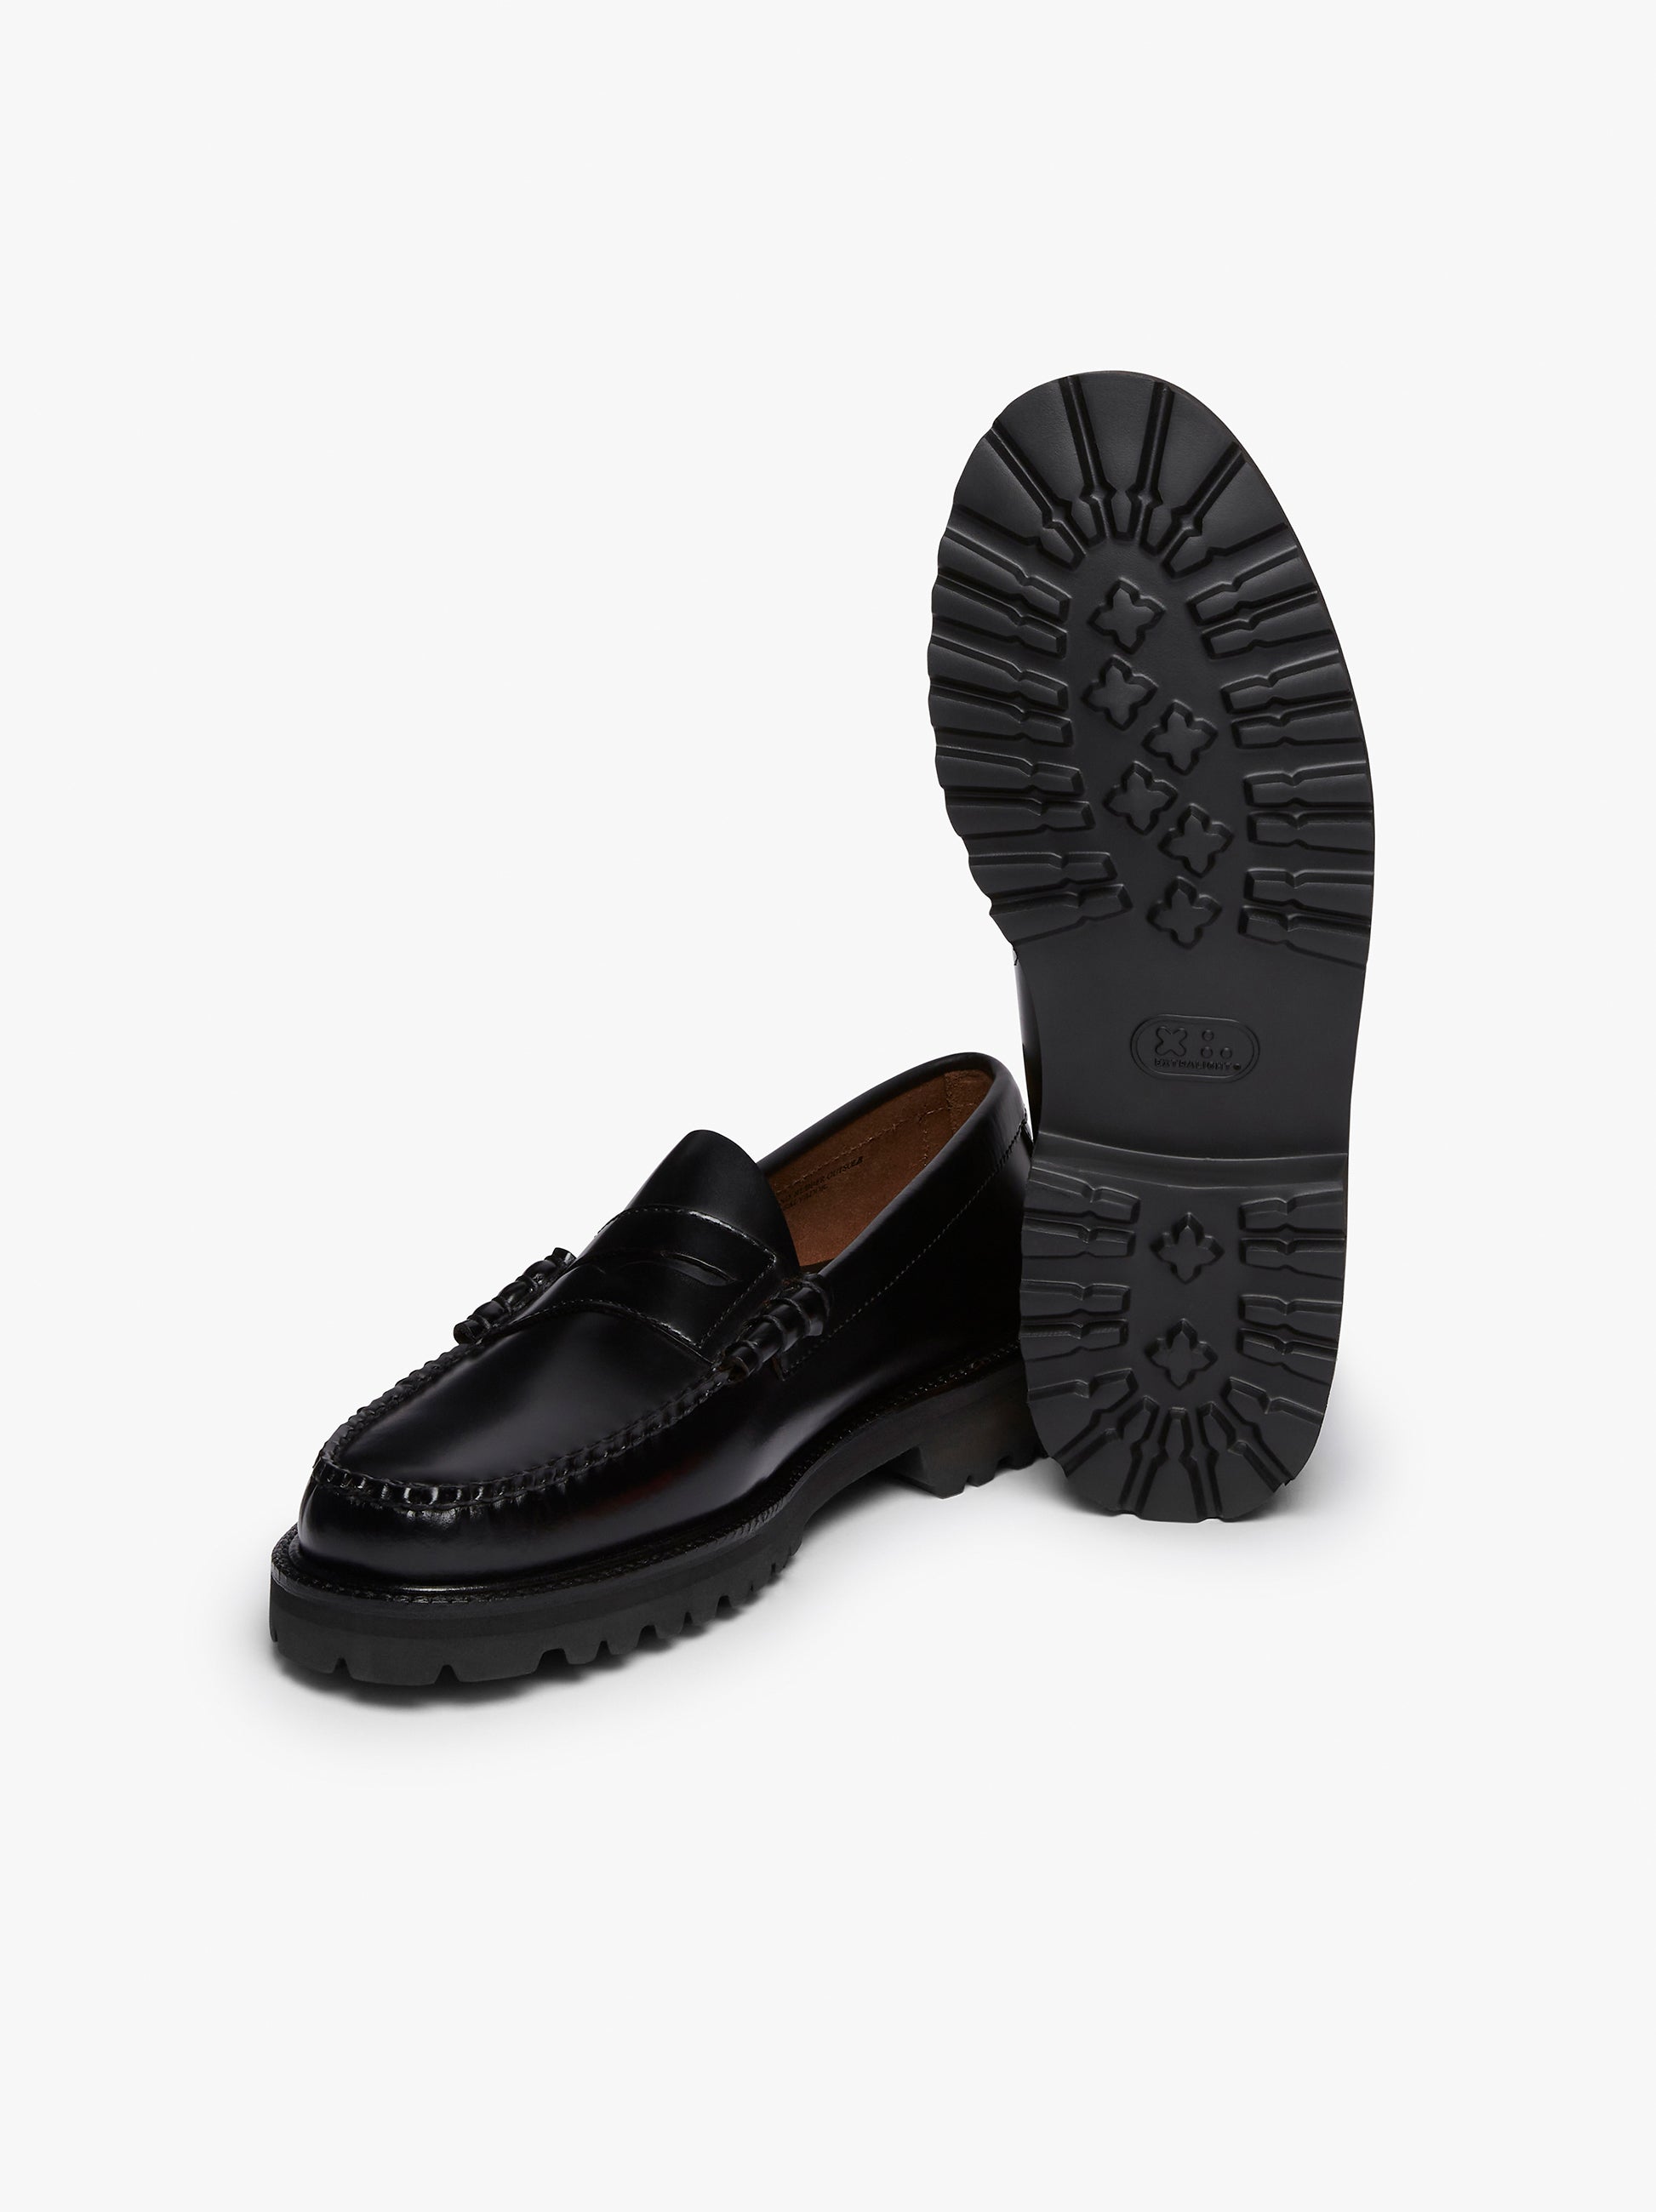 Black Loafers For Men | Bass Weejuns Larson 90S Loafer – G.H.BASS 1876